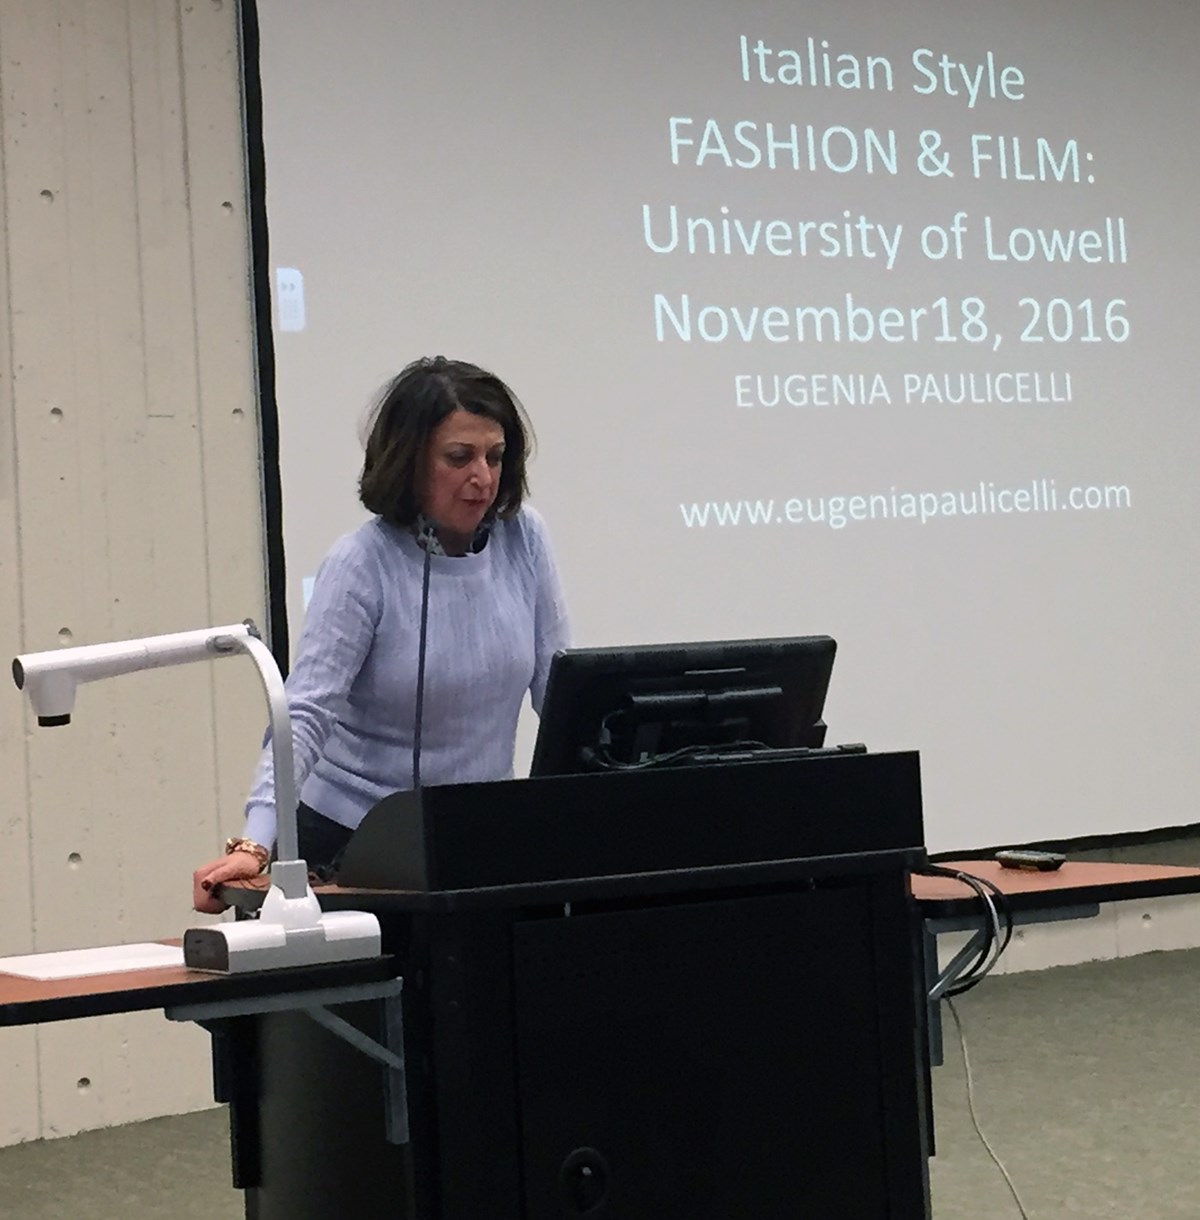 Eugenia Paulicelli during her presentation on Italian Style at the O’Leary Library, Lowell